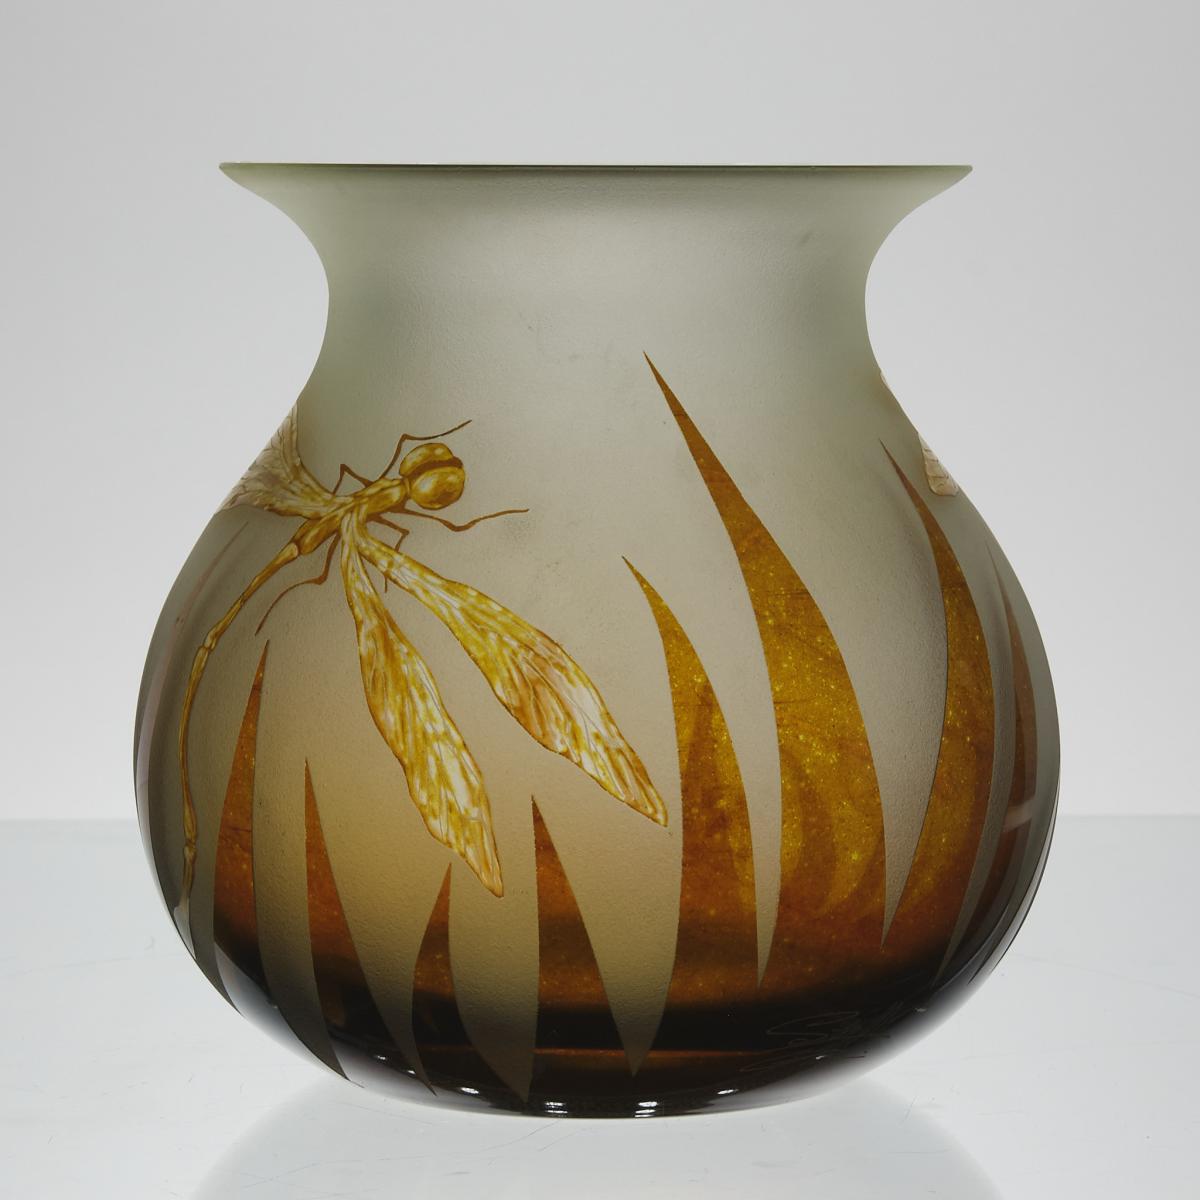 Limited Edition 21st Century Cameo Glass " Dragonfly Vase" by StanMir GR